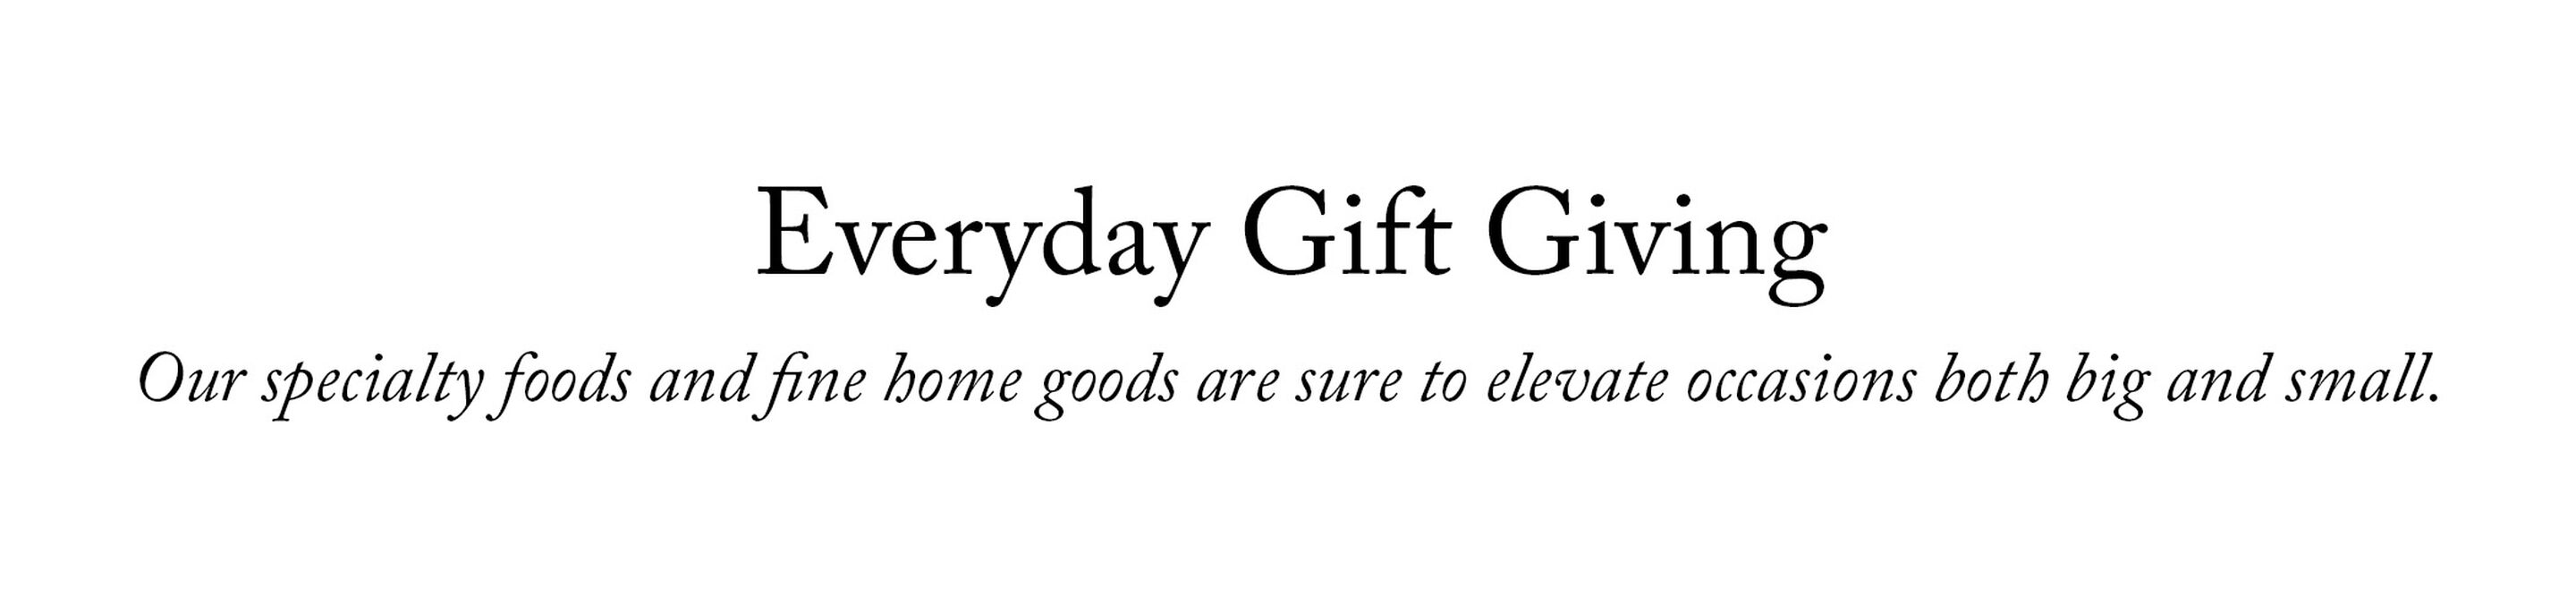 Everyday Gift Giving | Our specialty foods and fine home goods are sure to elevate occasions both big and small.